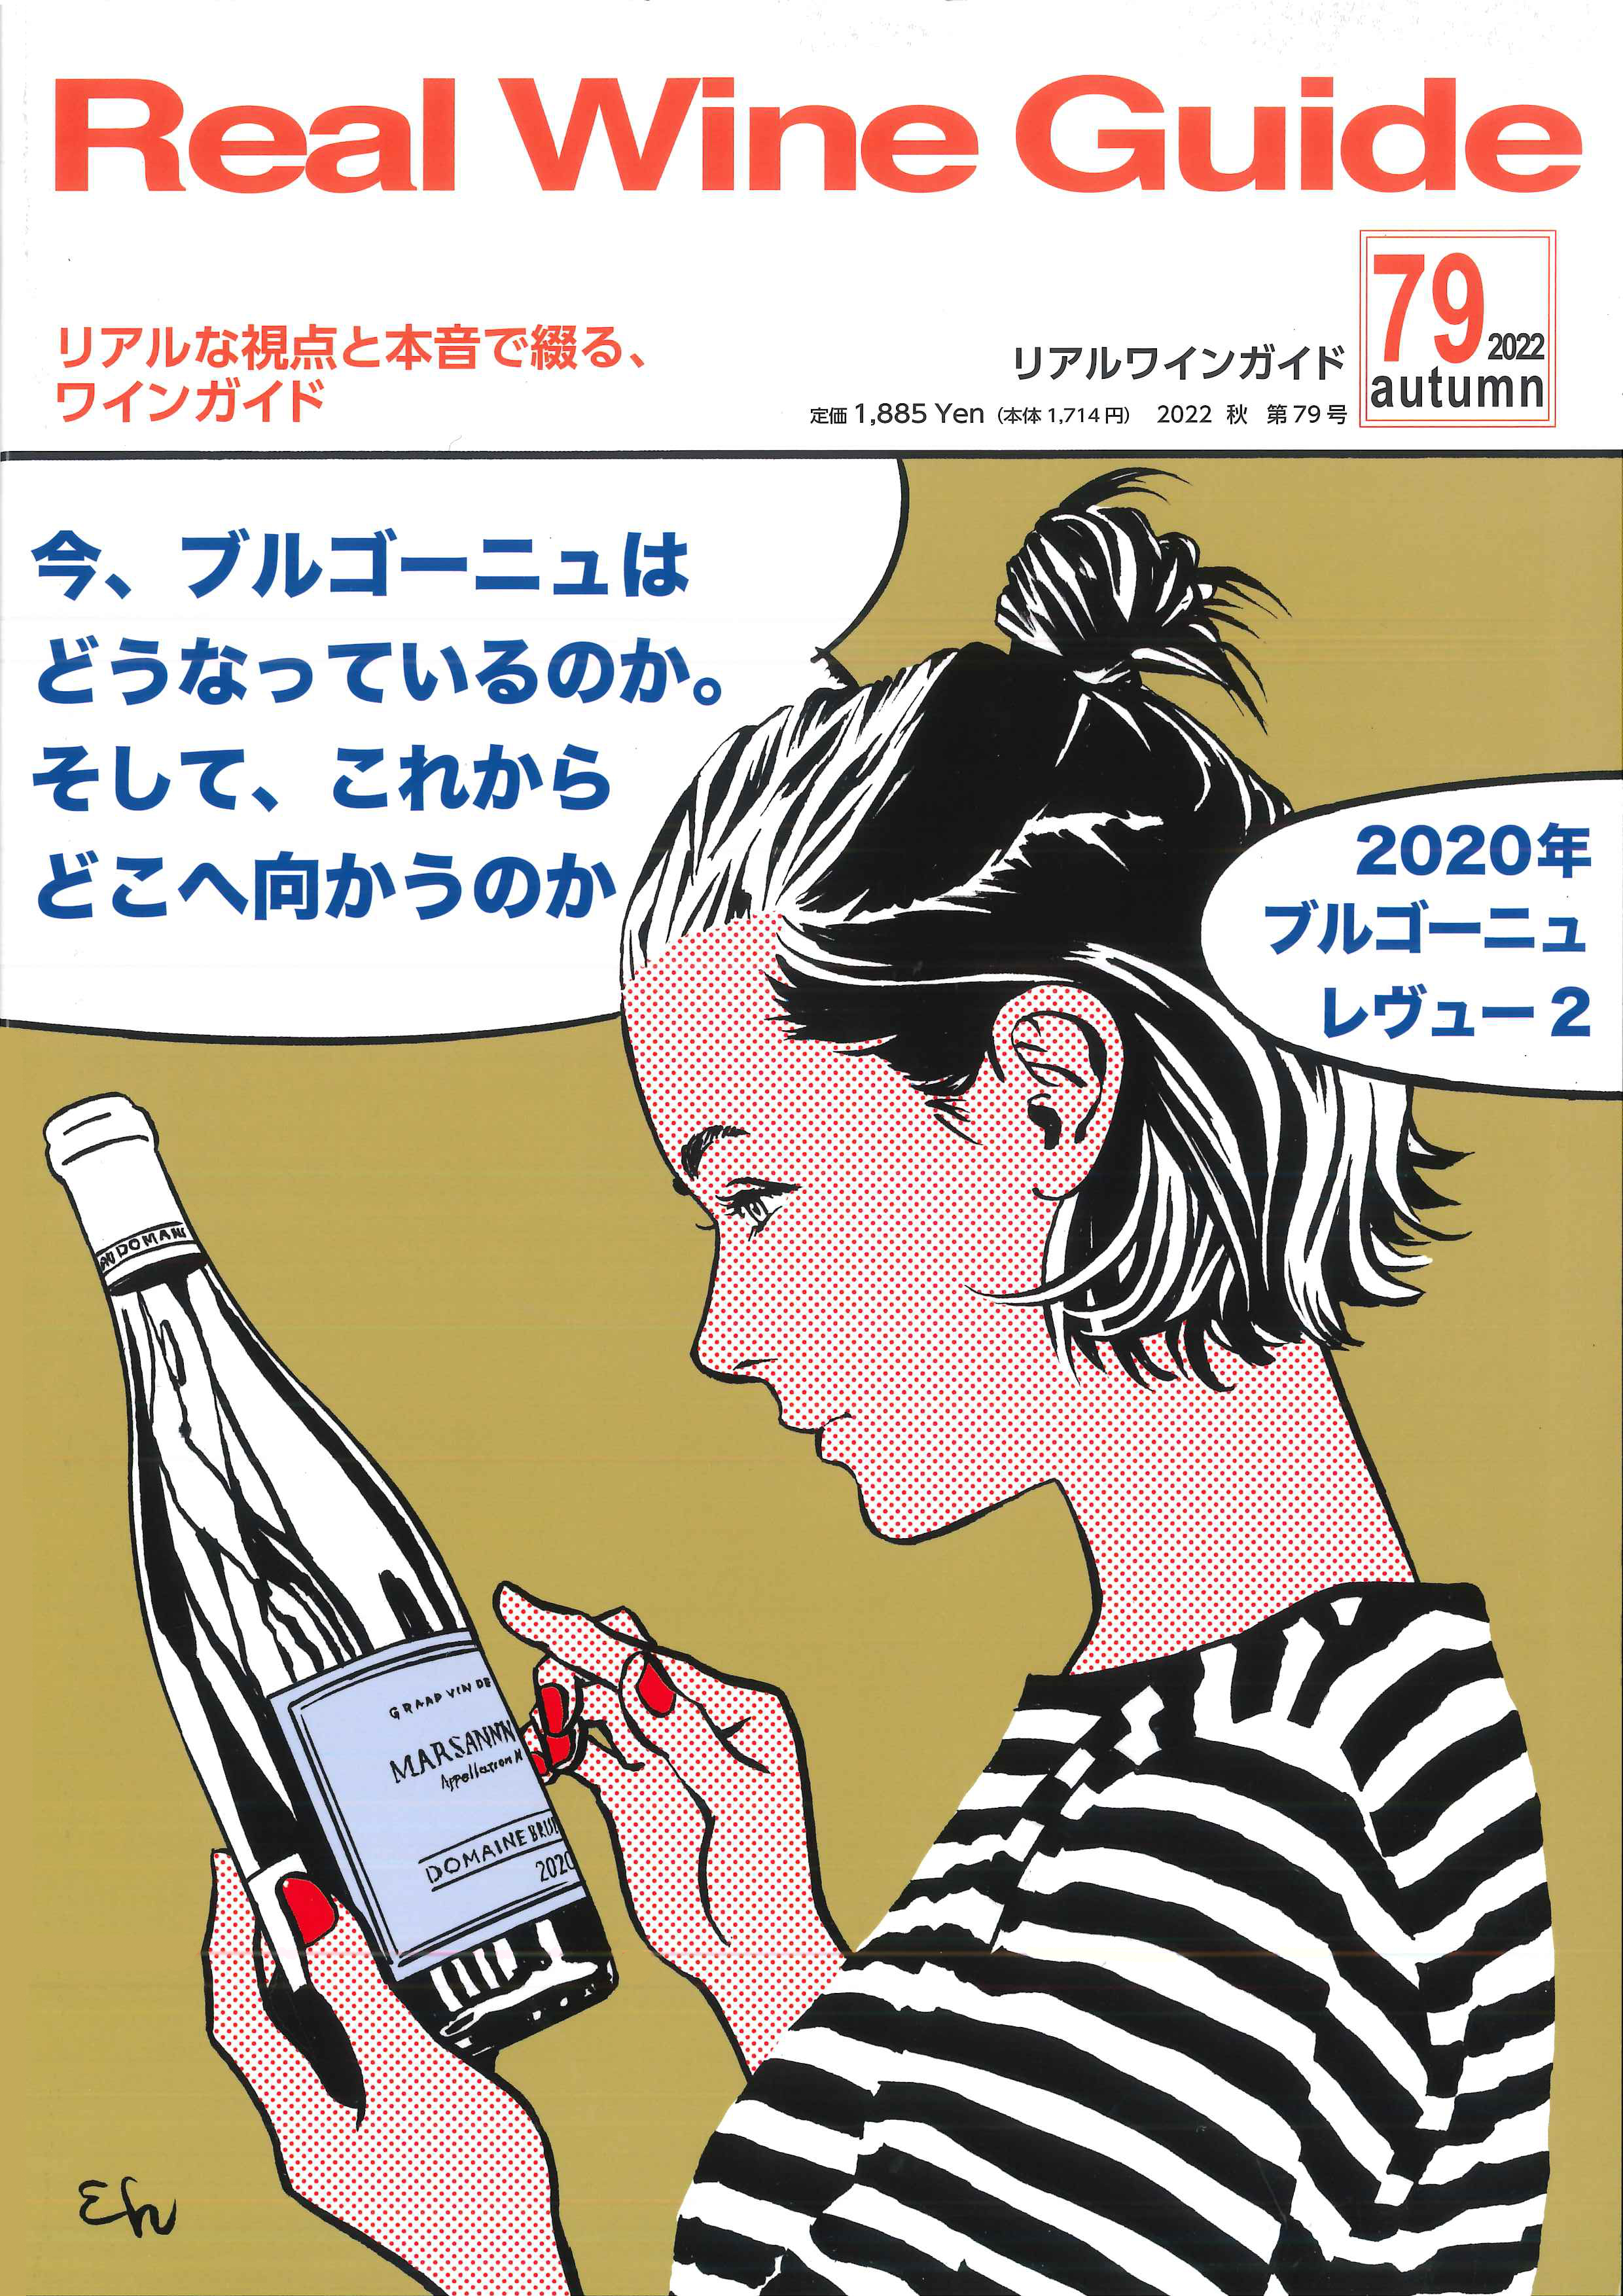 Real Wine Guide 79号